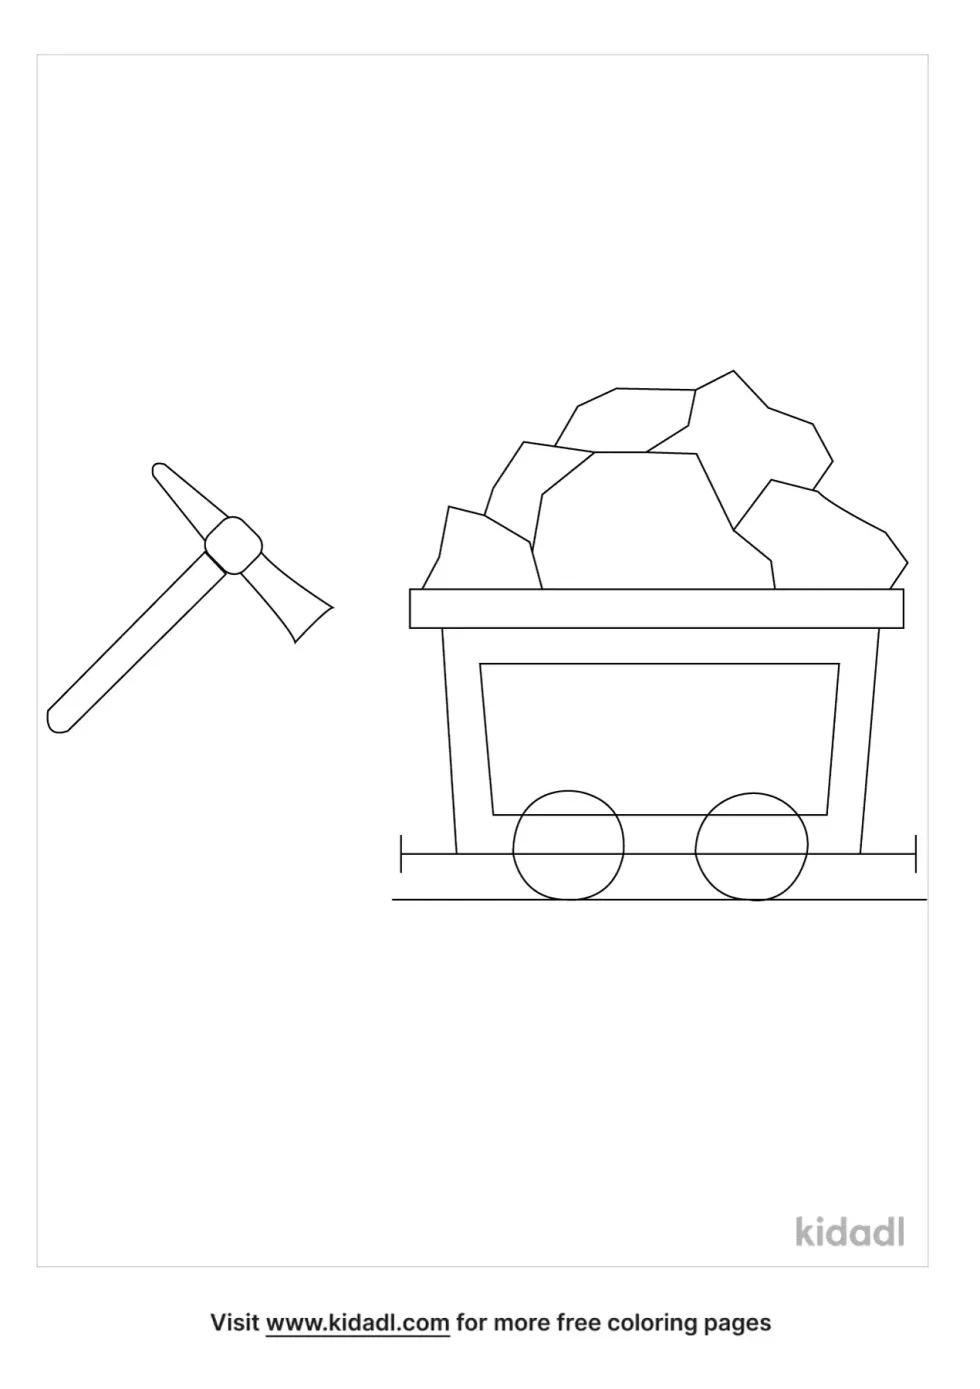 Coal Mine Coloring Page